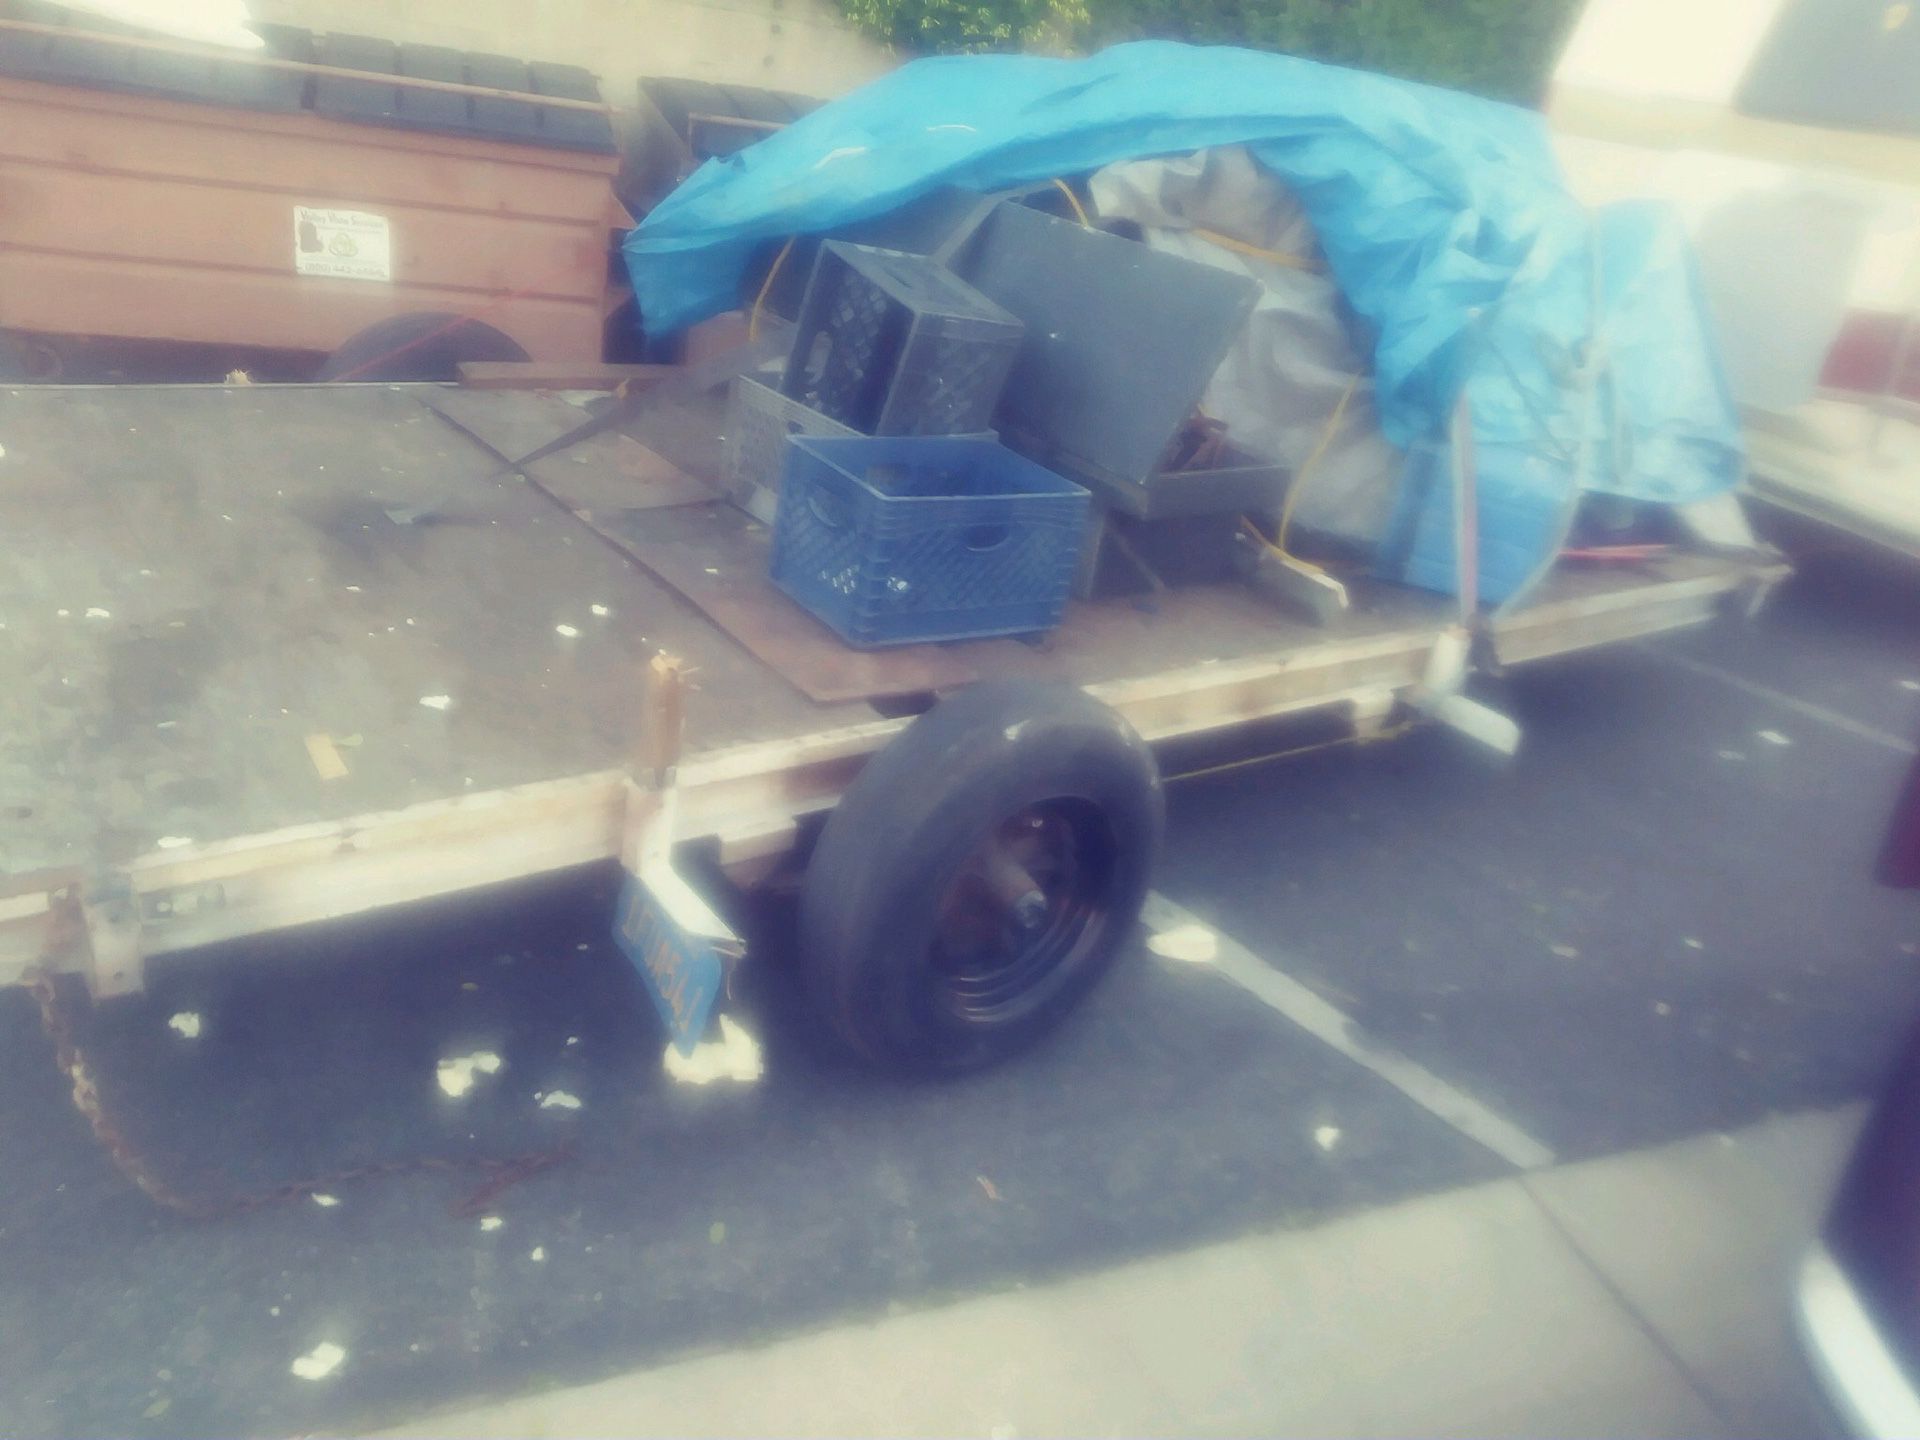 18x8 Trailer For Sale Cheap Price Need To Pick Up El Monte 700$ obo